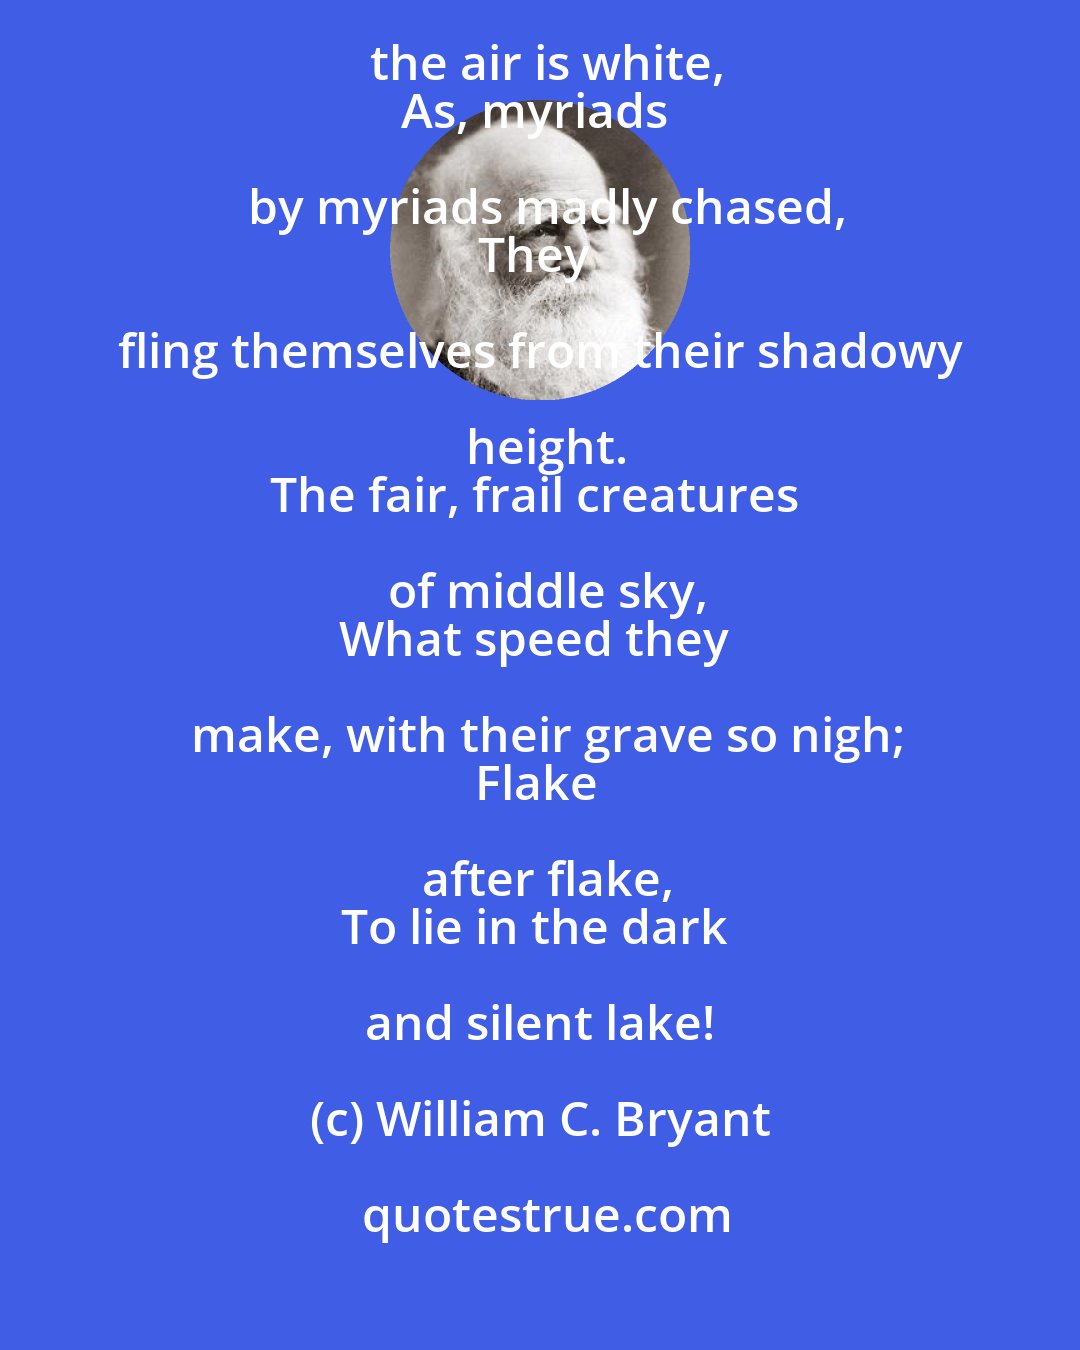 William C. Bryant: Lo! while we are gazing, in swifter haste
Stream down the snows, till the air is white,
As, myriads by myriads madly chased,
They fling themselves from their shadowy height.
The fair, frail creatures of middle sky,
What speed they make, with their grave so nigh;
Flake after flake,
To lie in the dark and silent lake!